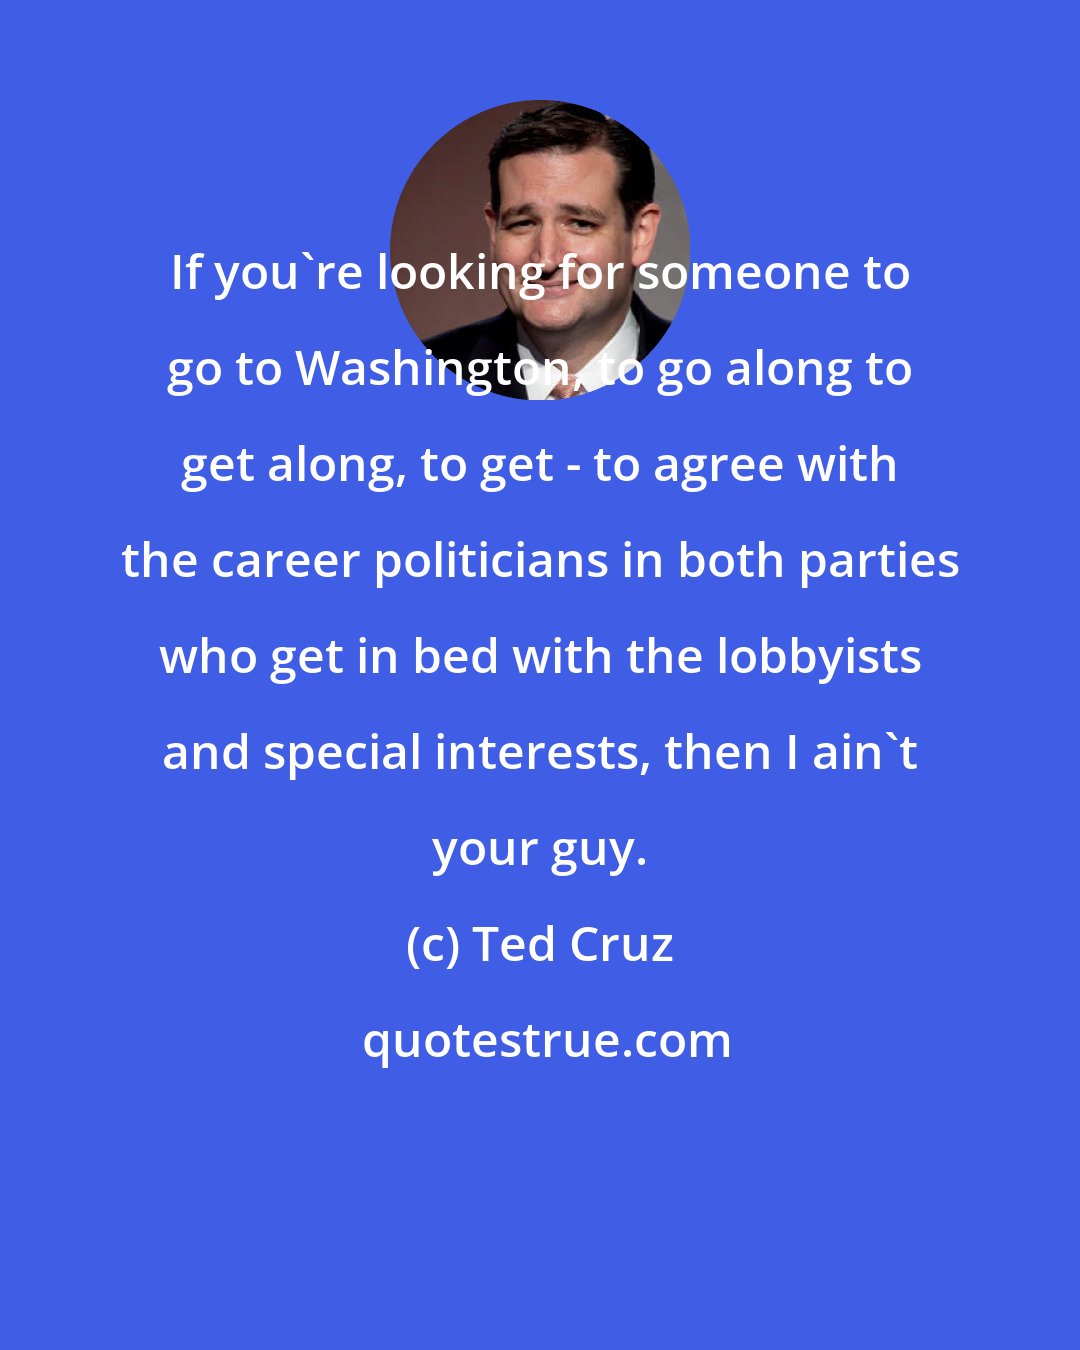 Ted Cruz: If you're looking for someone to go to Washington, to go along to get along, to get - to agree with the career politicians in both parties who get in bed with the lobbyists and special interests, then I ain't your guy.